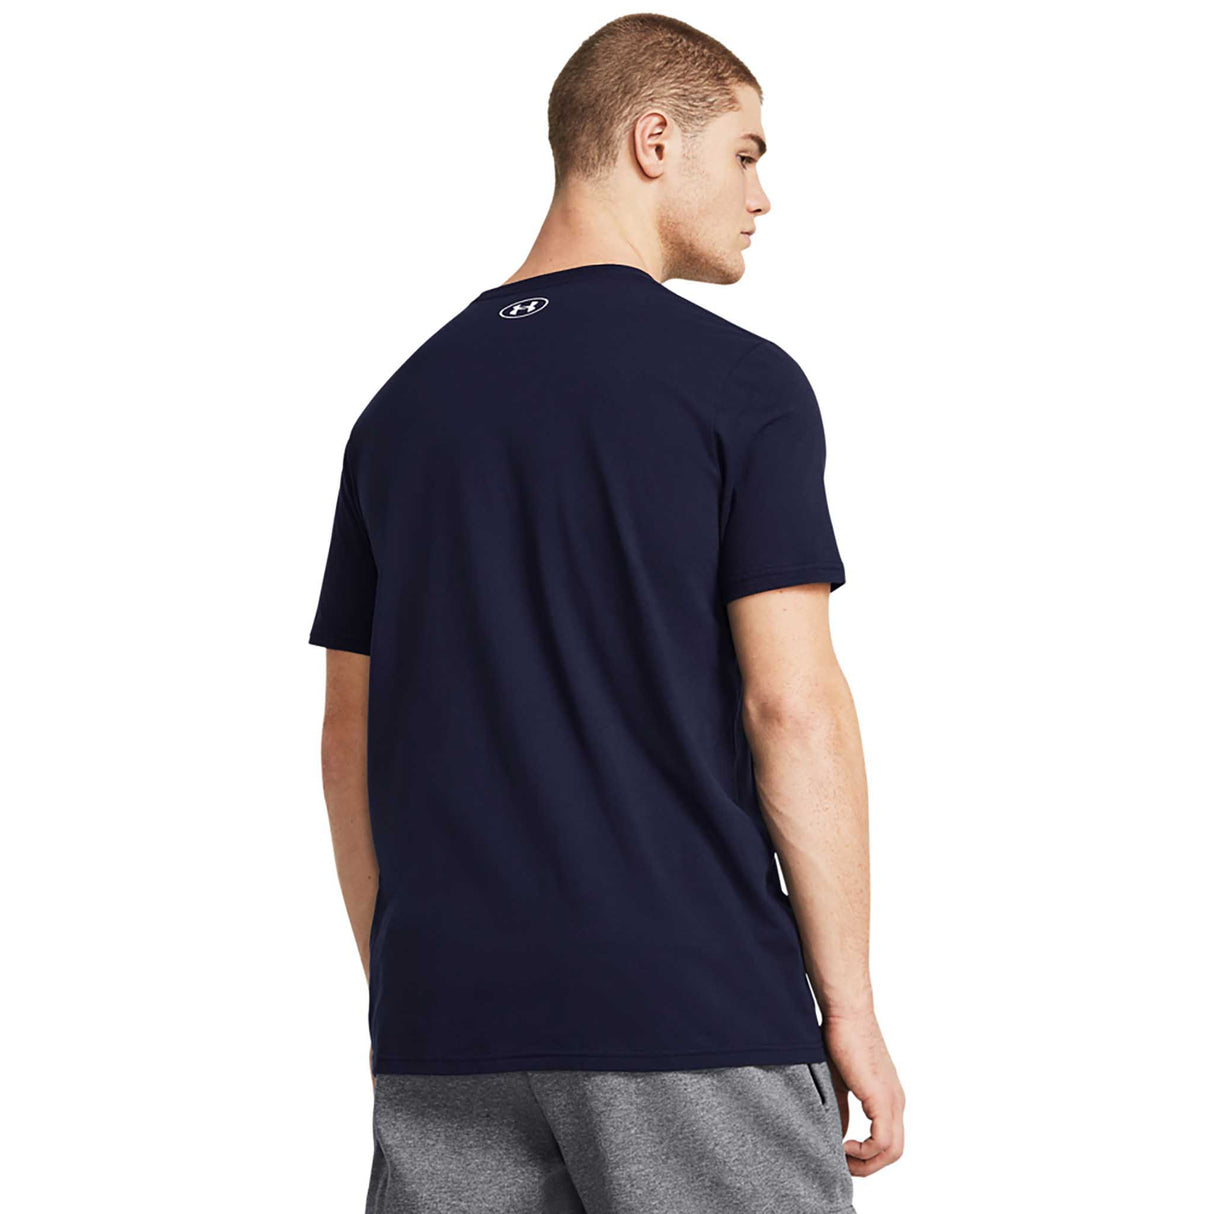 Under Armour Camo t-shirt à manches courtes homme dos live - Midnight Navy / White